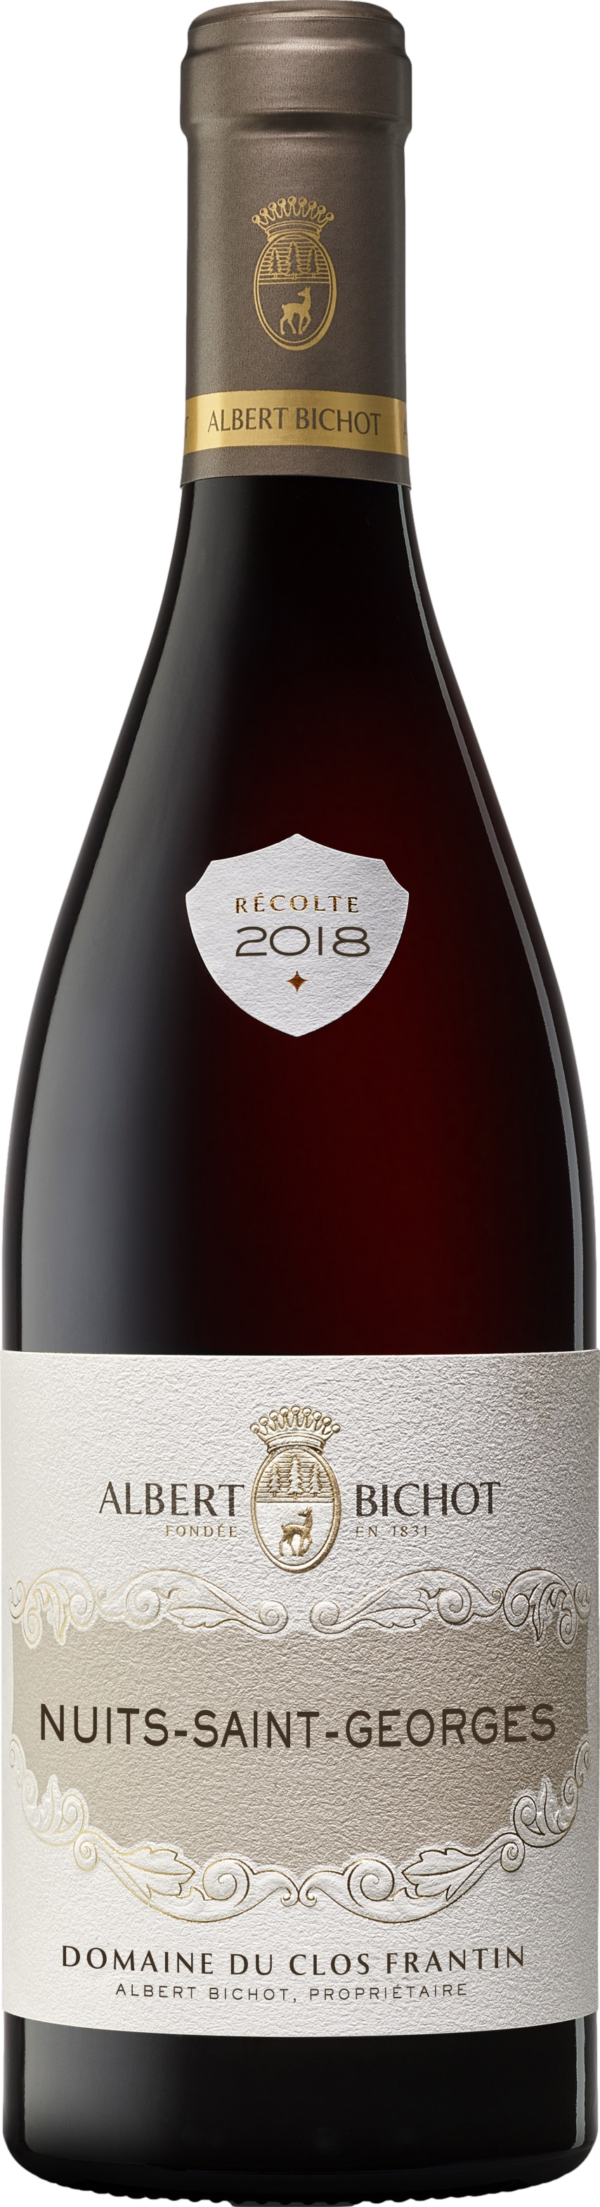 Product image of Albert Bichot Domaine du Clos Frantin Nuits-Saint-Georges 2018 from 8wines